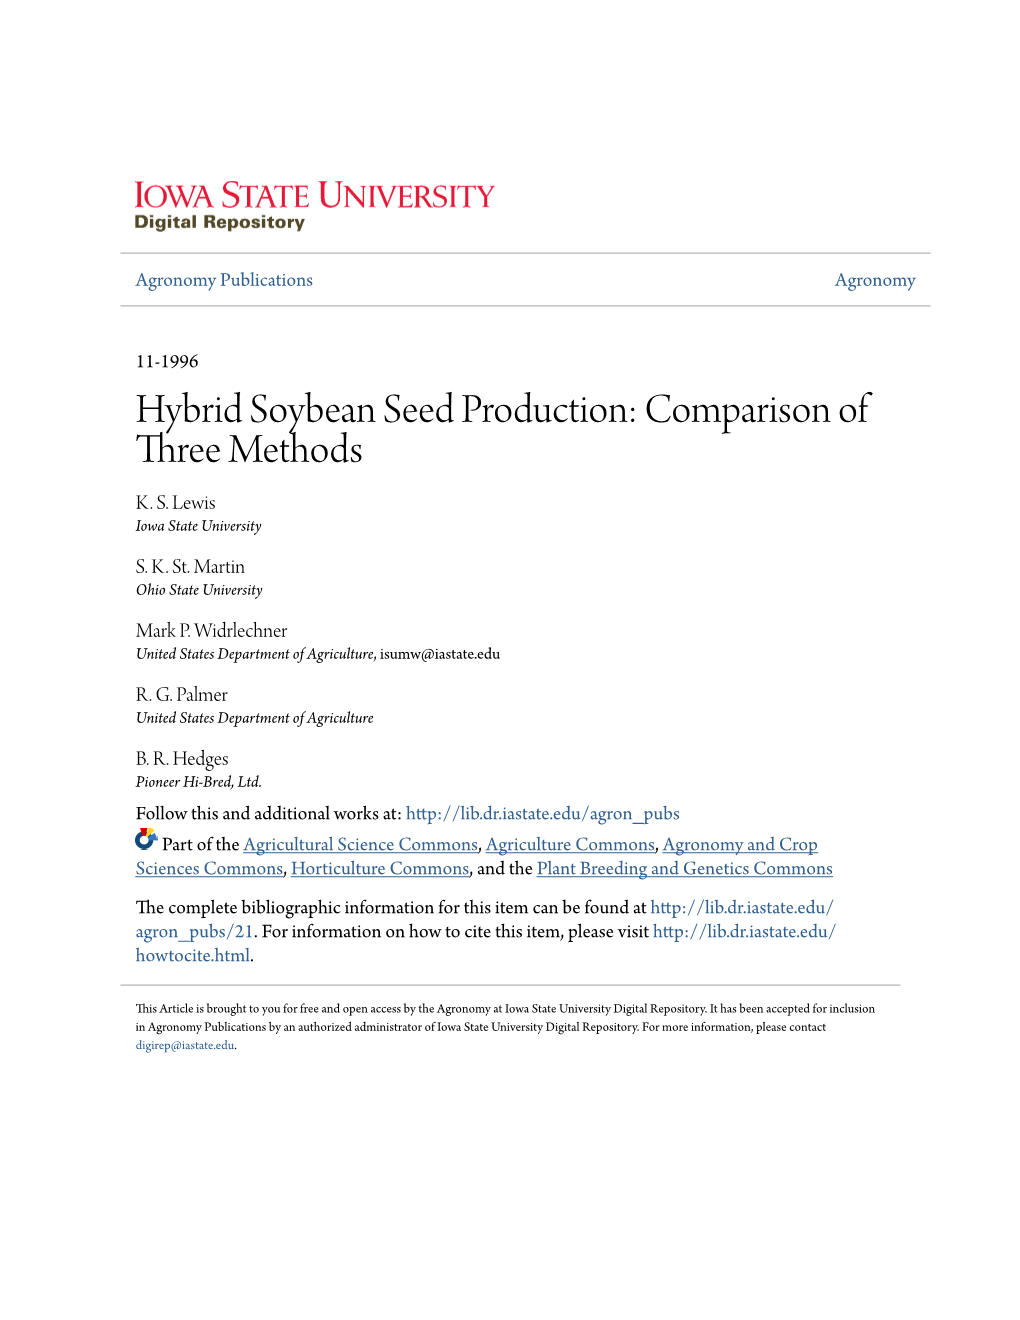 Hybrid Soybean Seed Production: Comparison of Three Methods K